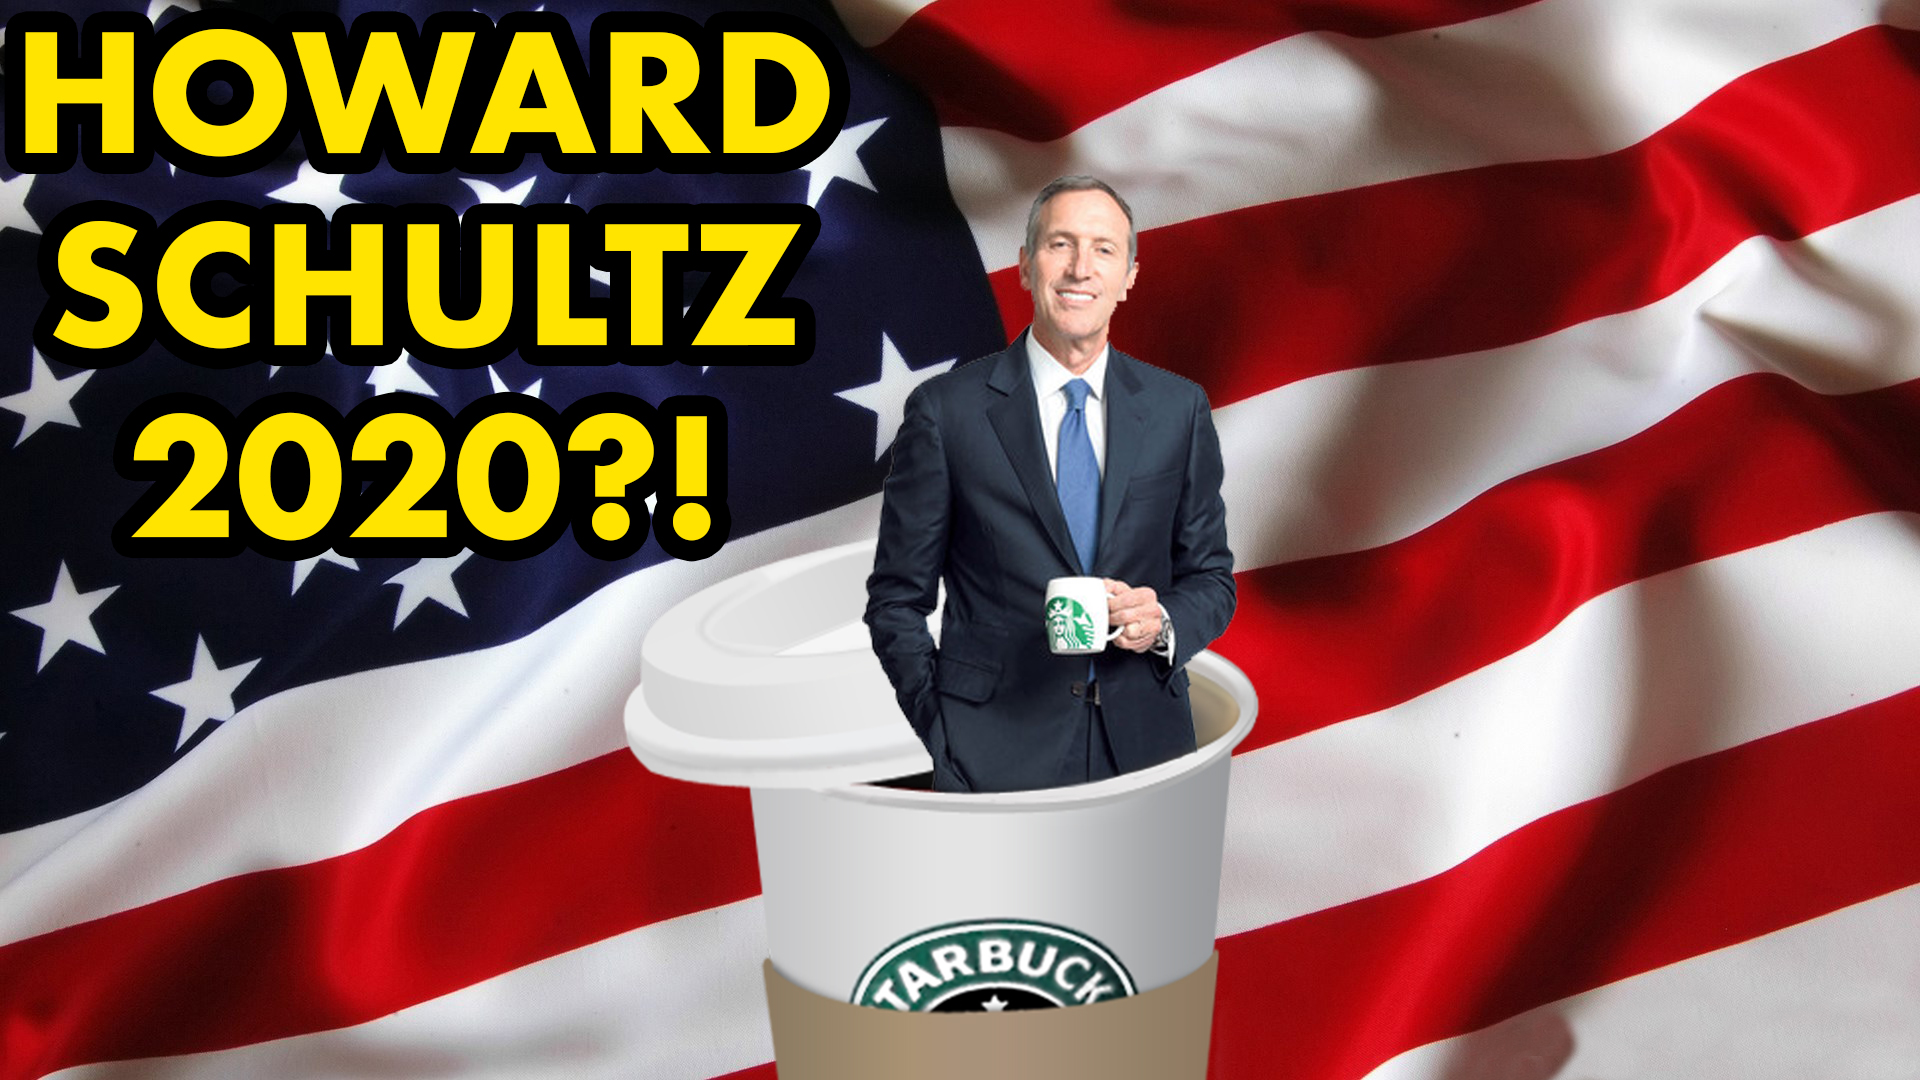 Is Howard Schultz a viable candidate for President of the United States?